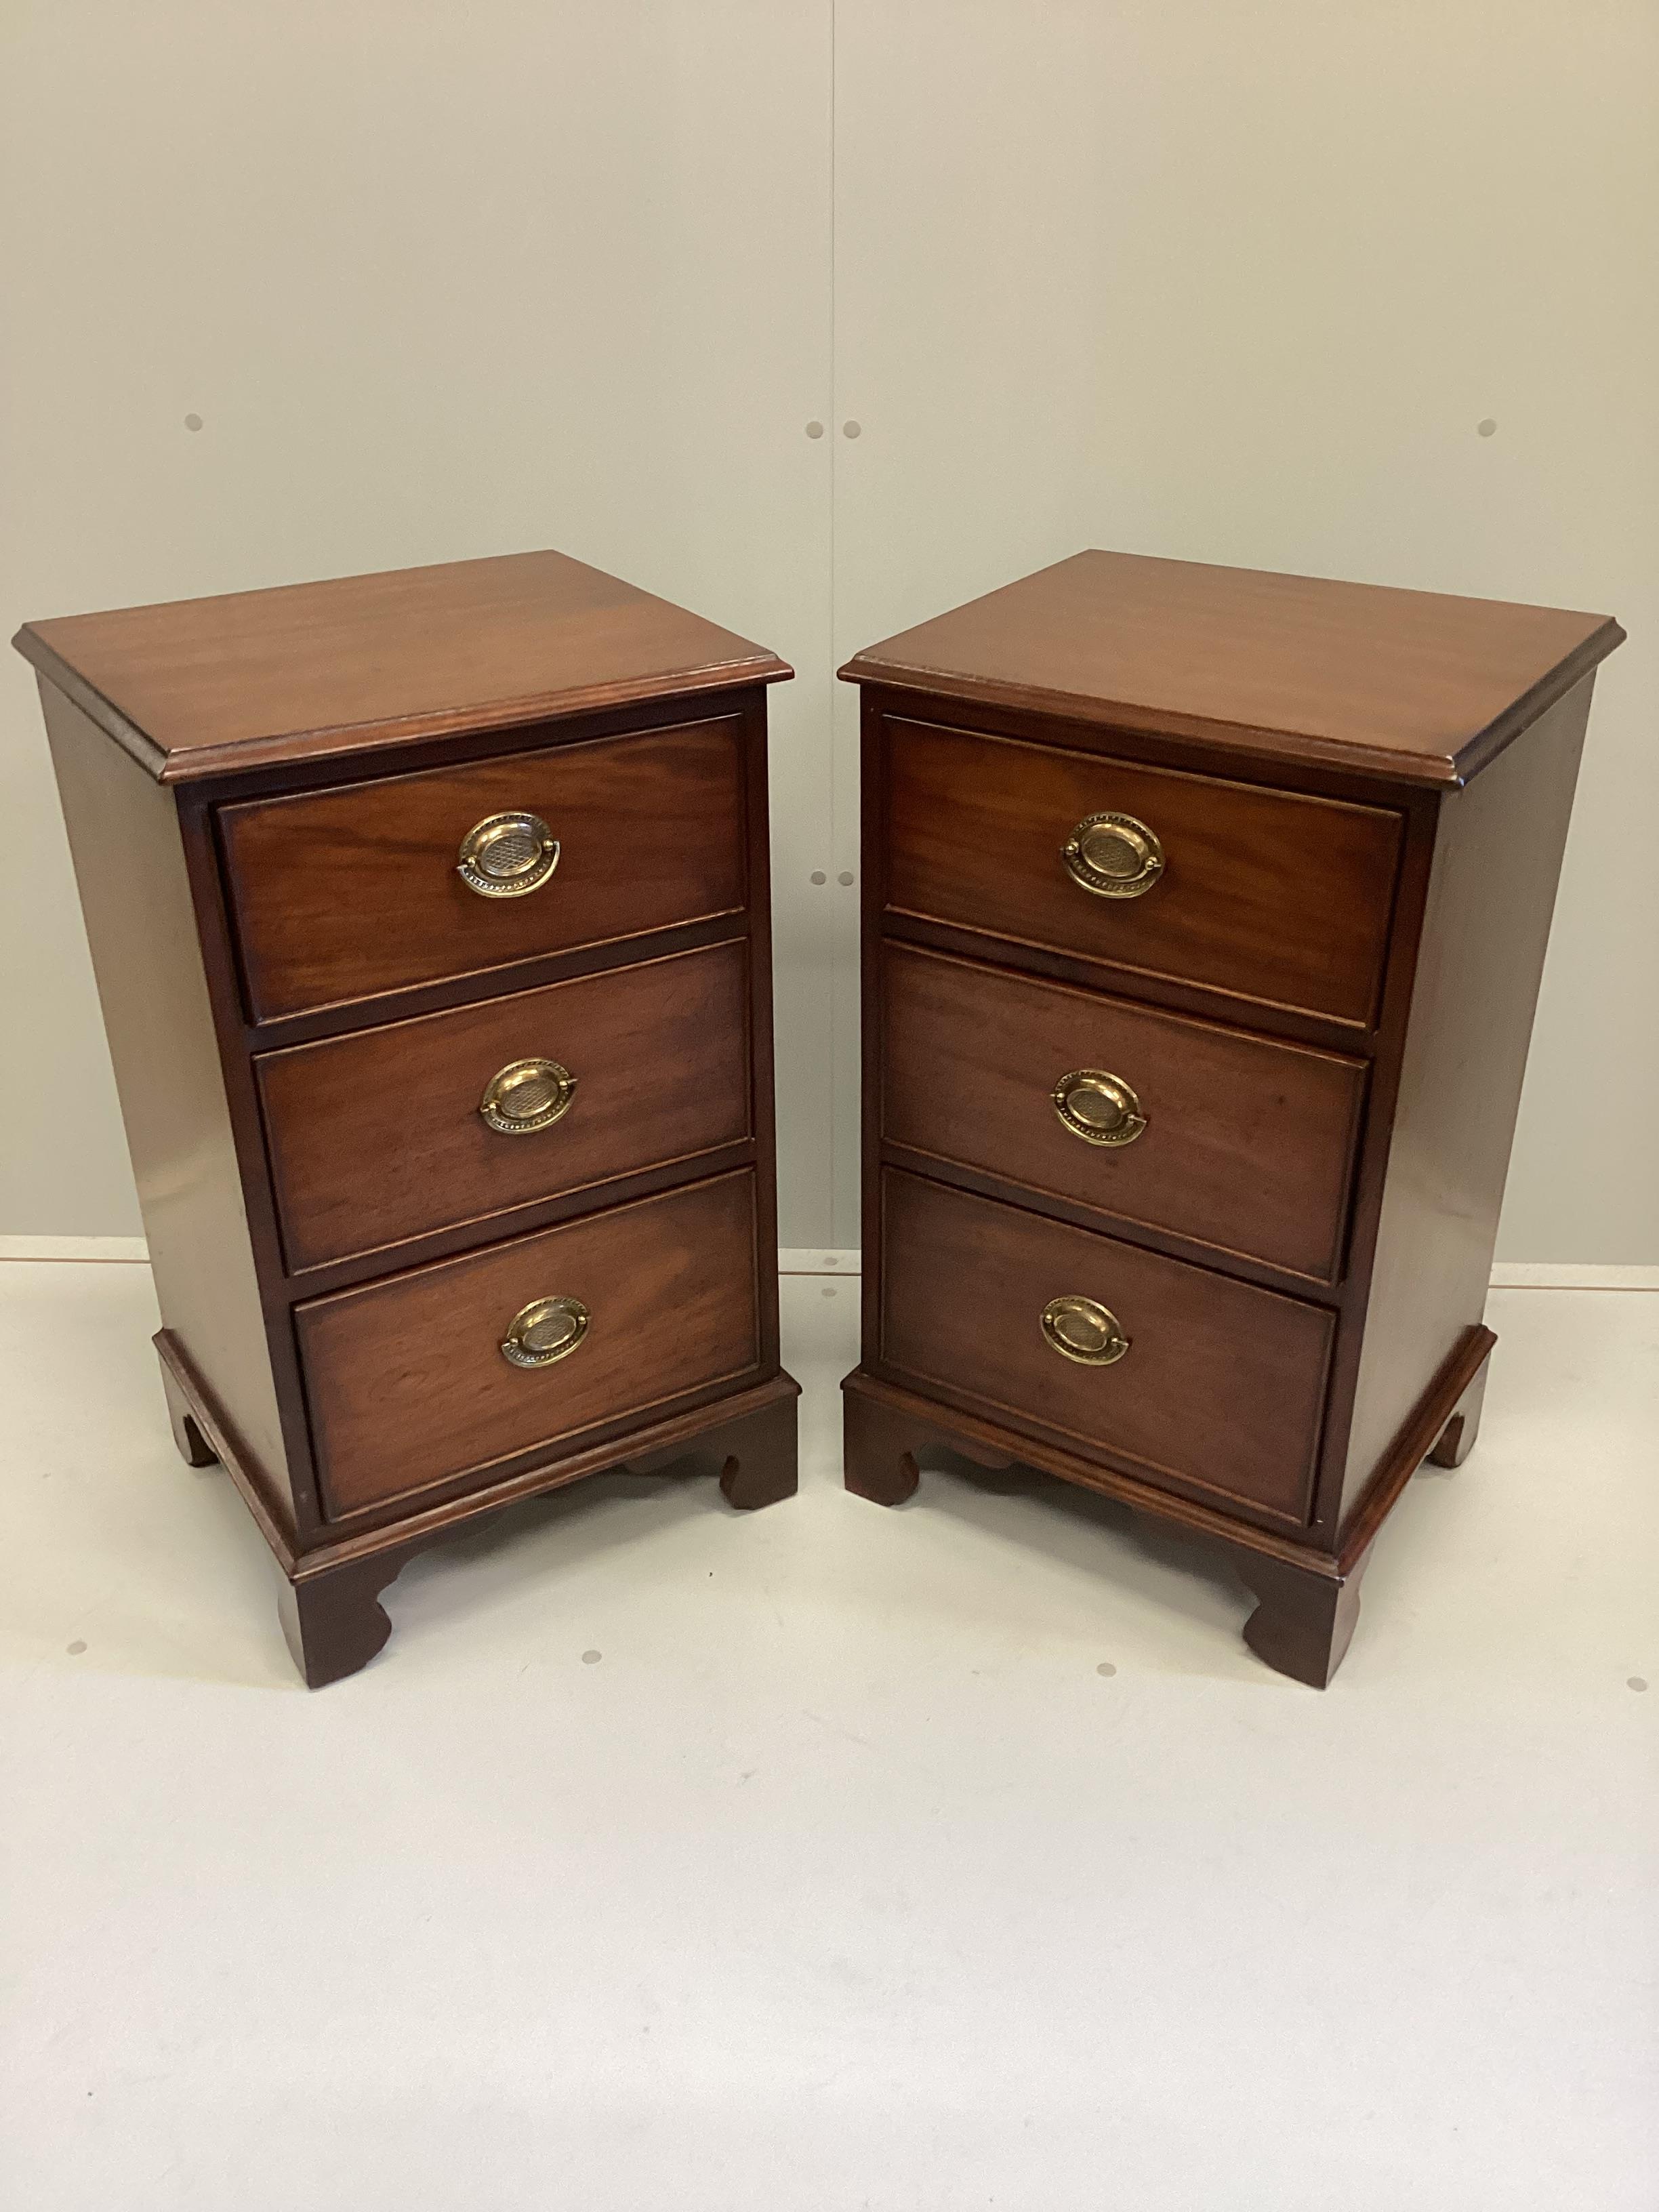 A pair of George III style mahogany three drawer bedside chests, width 47cm, depth 40cm, height 80cm